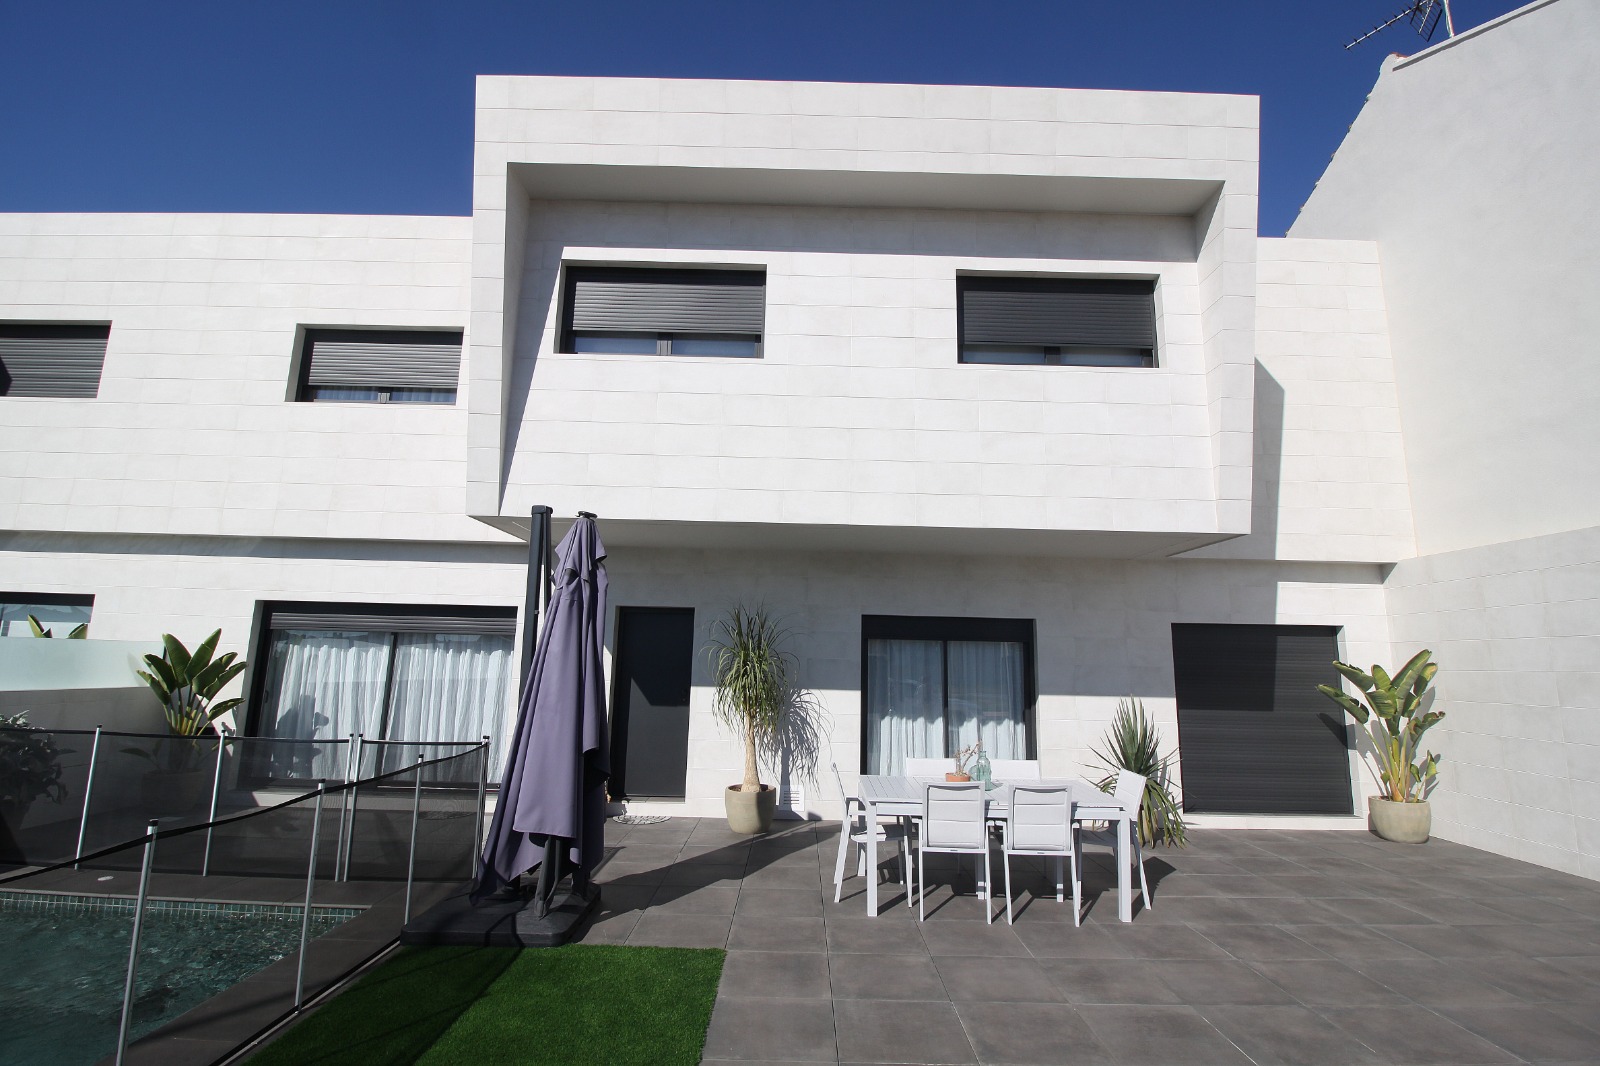 Townhouse for sale in San Pedro del Pinatar and San Javier 28